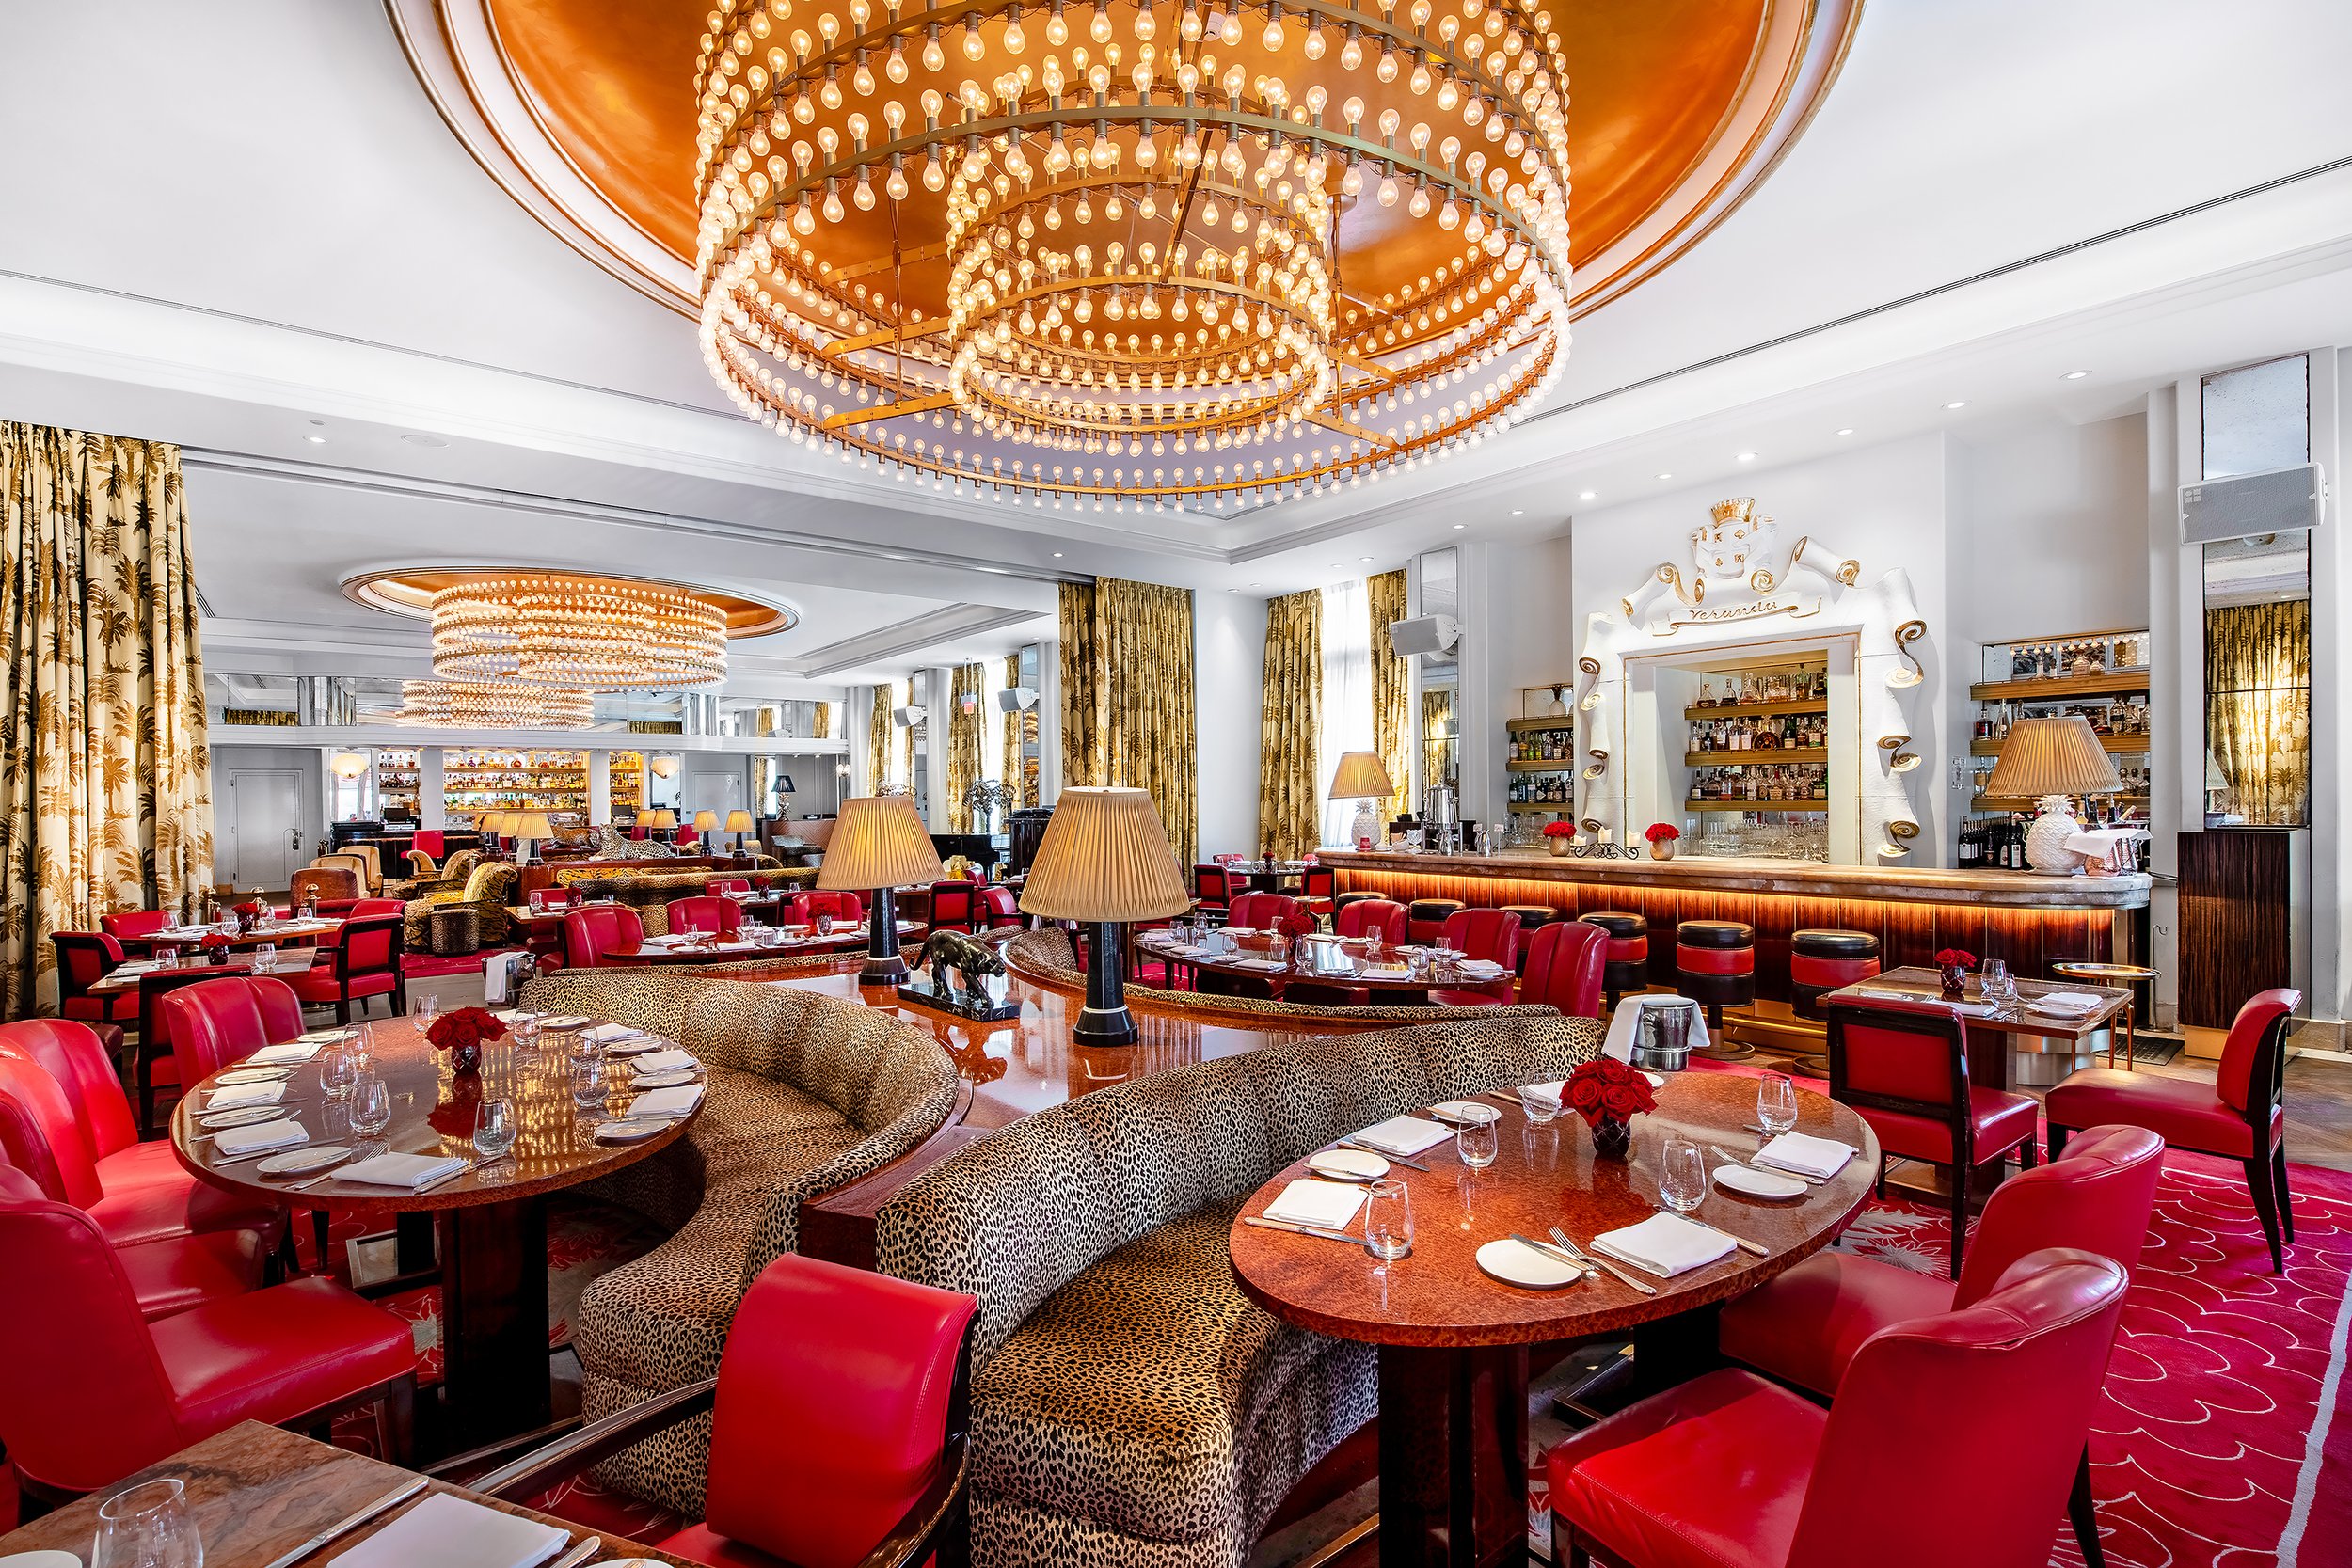 Faena Hotel Miami Beach - dining room interior - photo by Andrew Werner .jpg